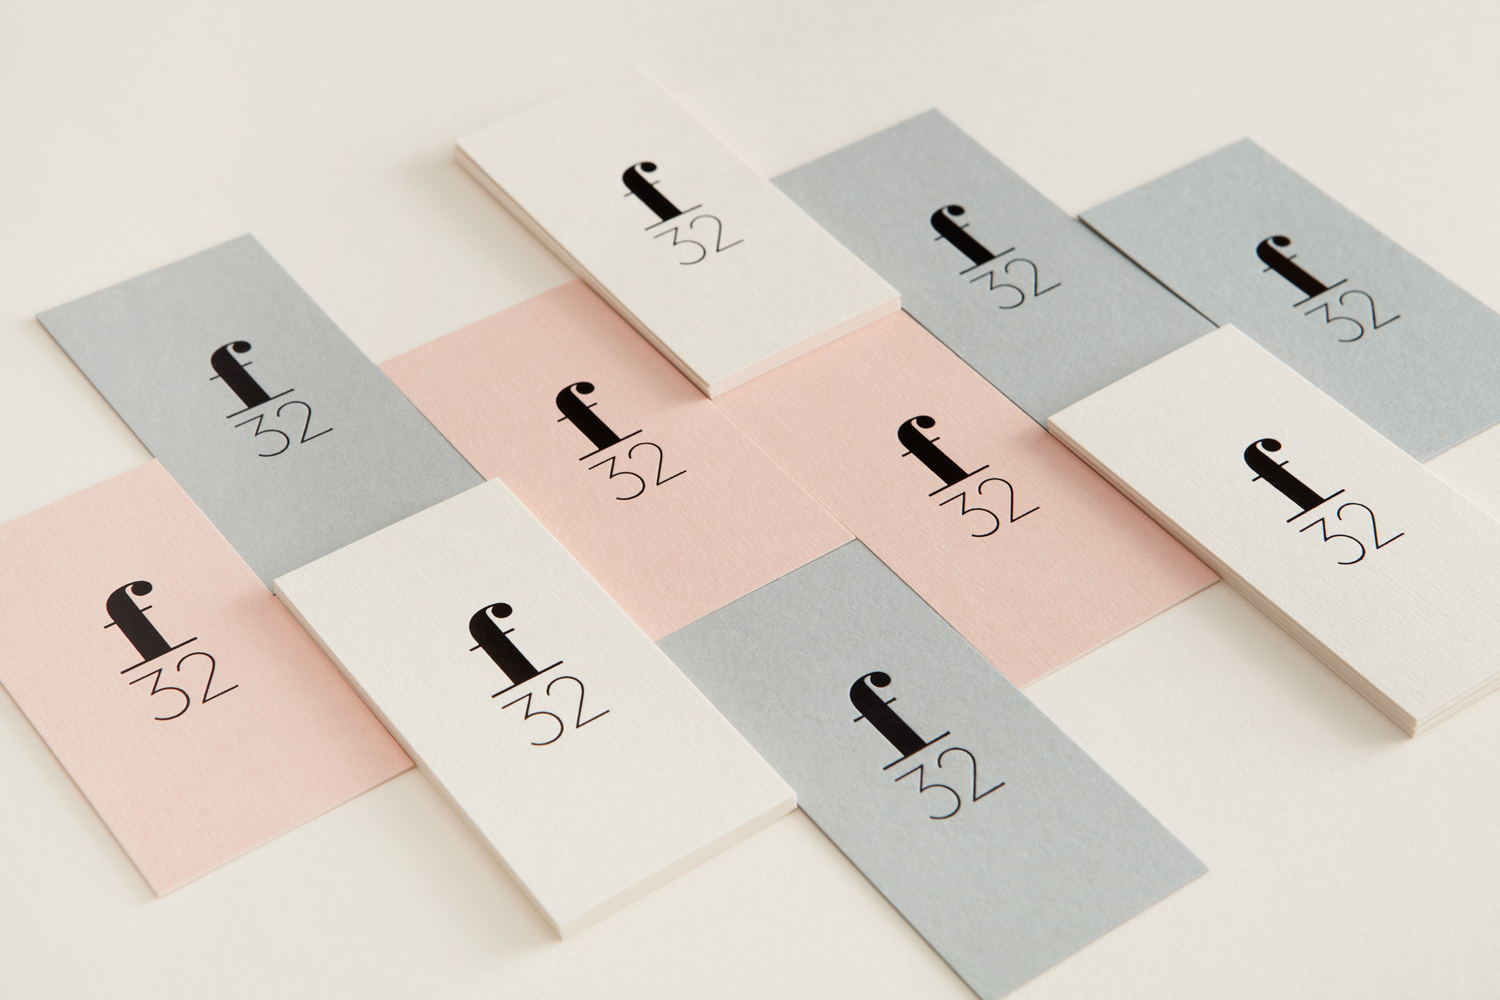 Brand identity and block foil business cards by Blok for LA based trend-watching company f32